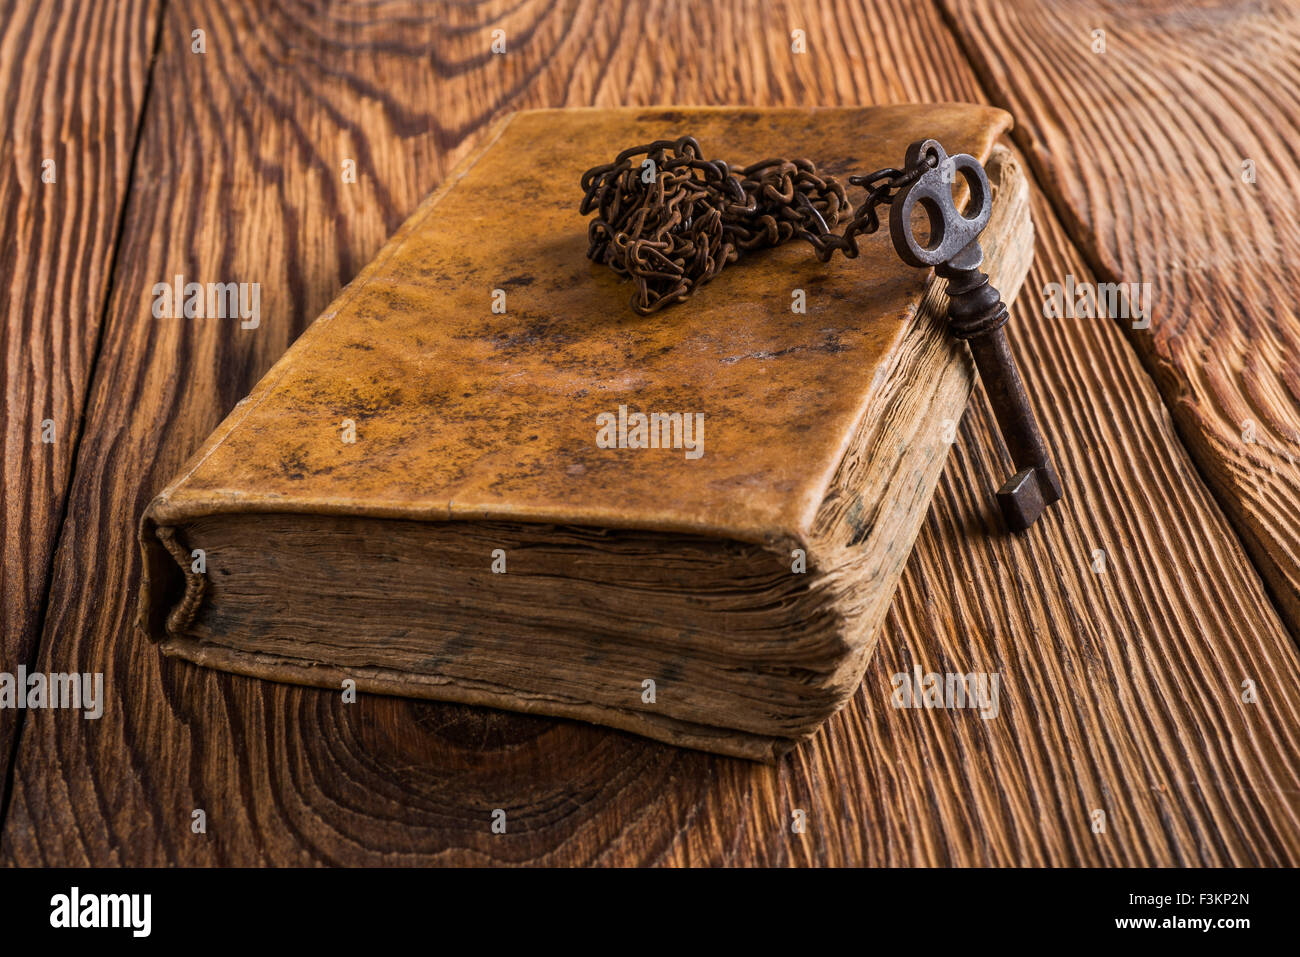 Old key with chain on an book Stock Photo